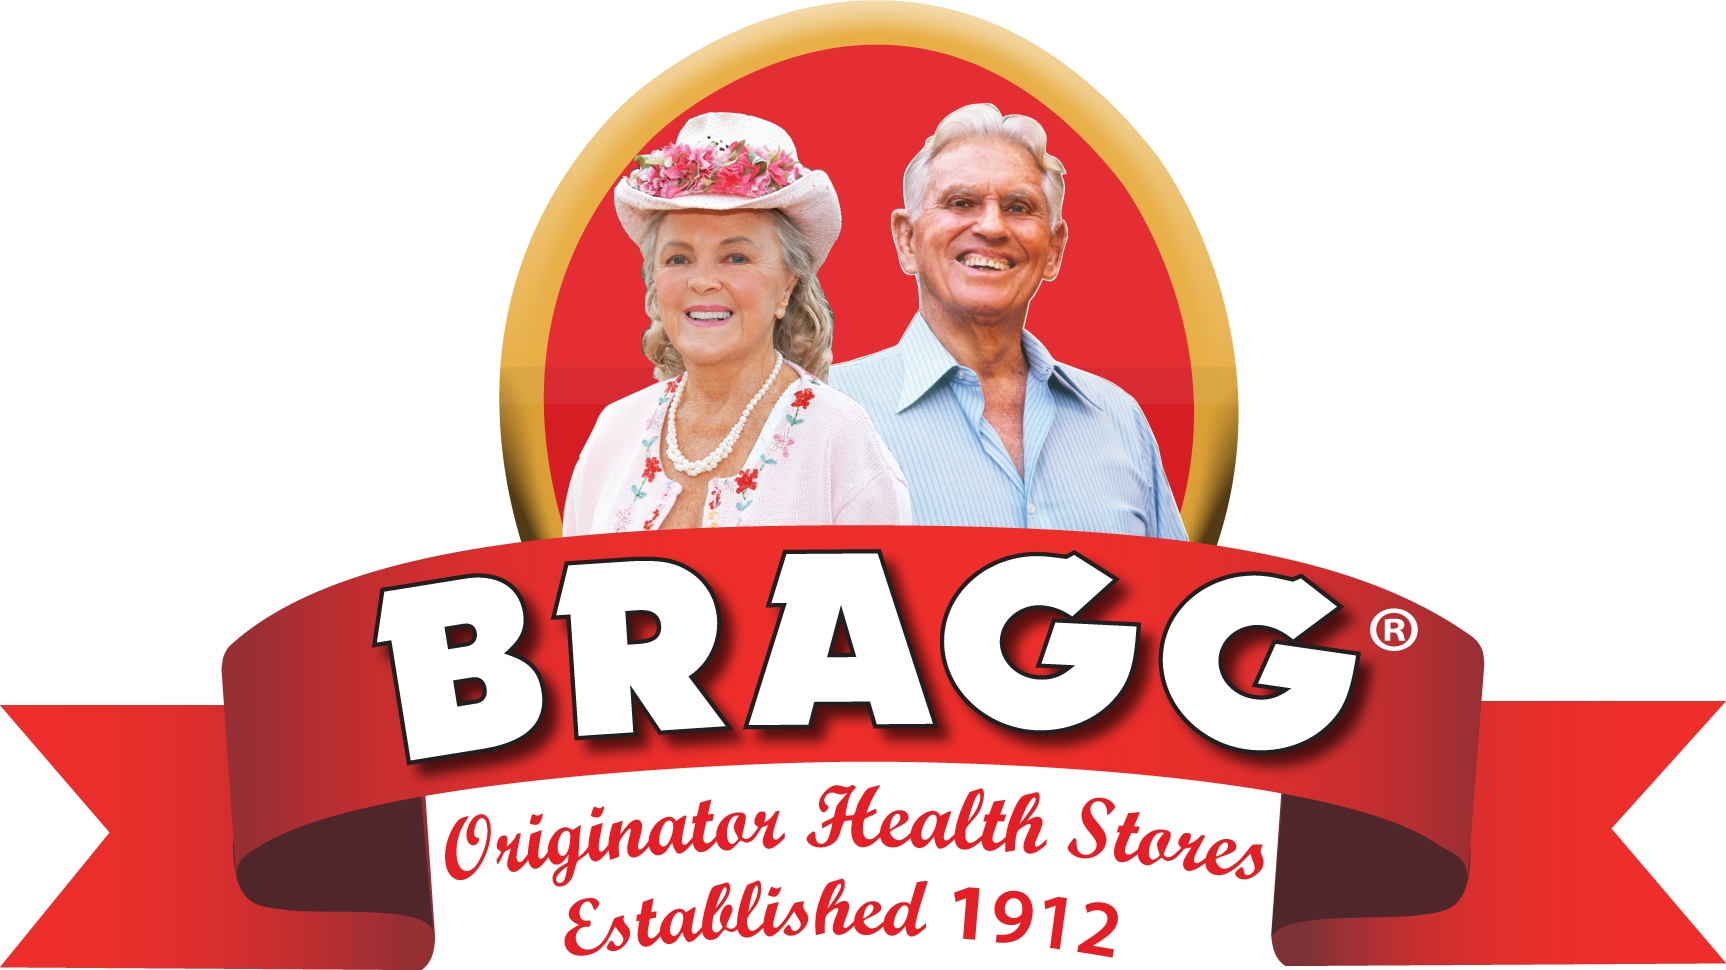 View products from BRAGG